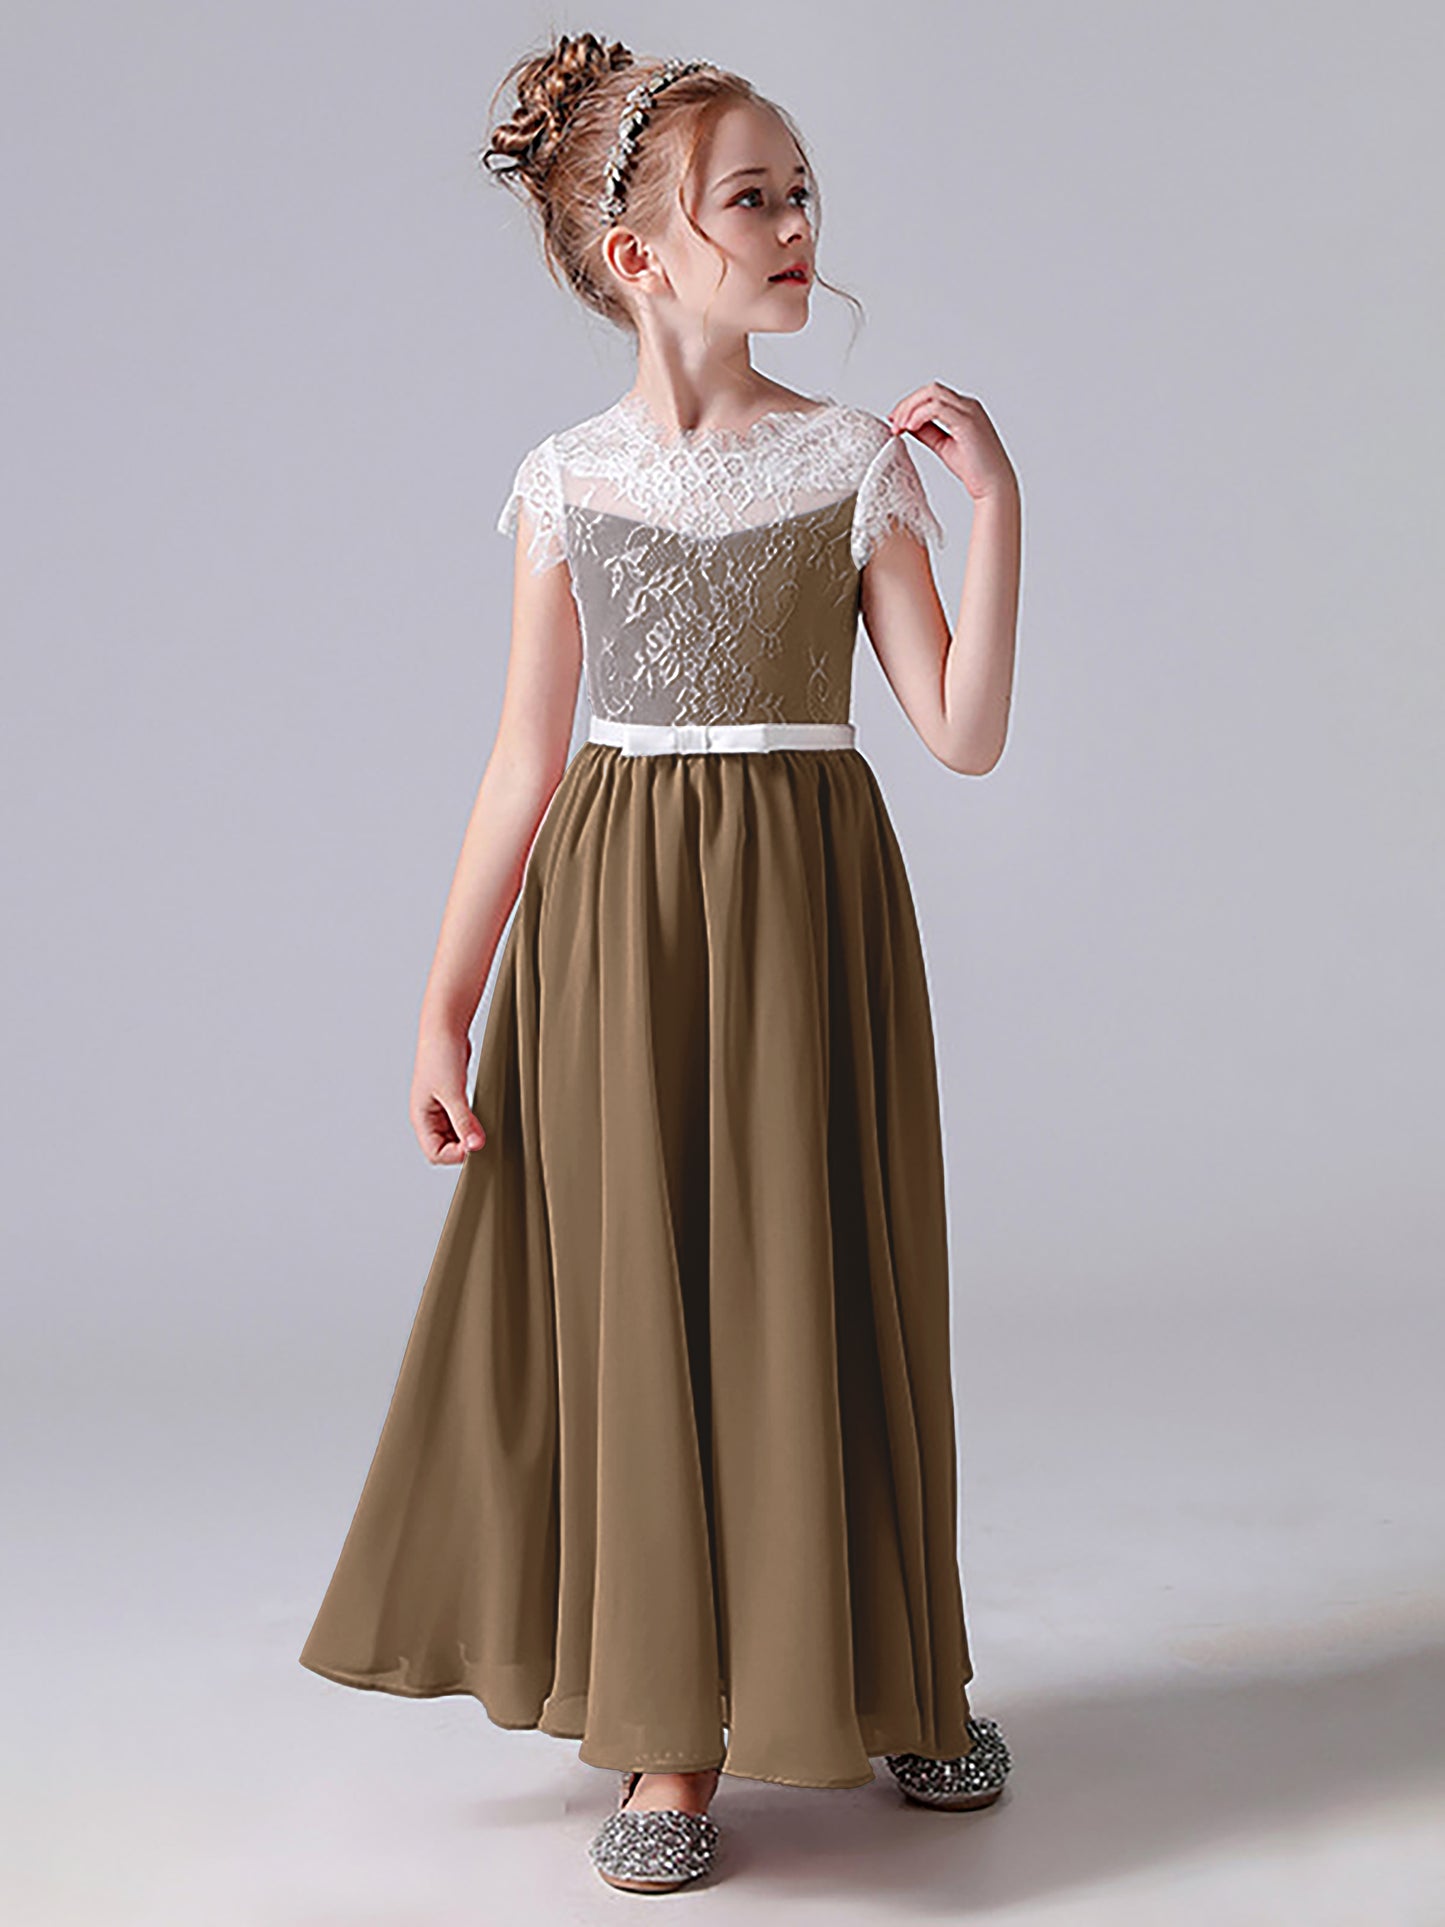 Lace Scoop Junior Bridesmaid Dress with Sleeves